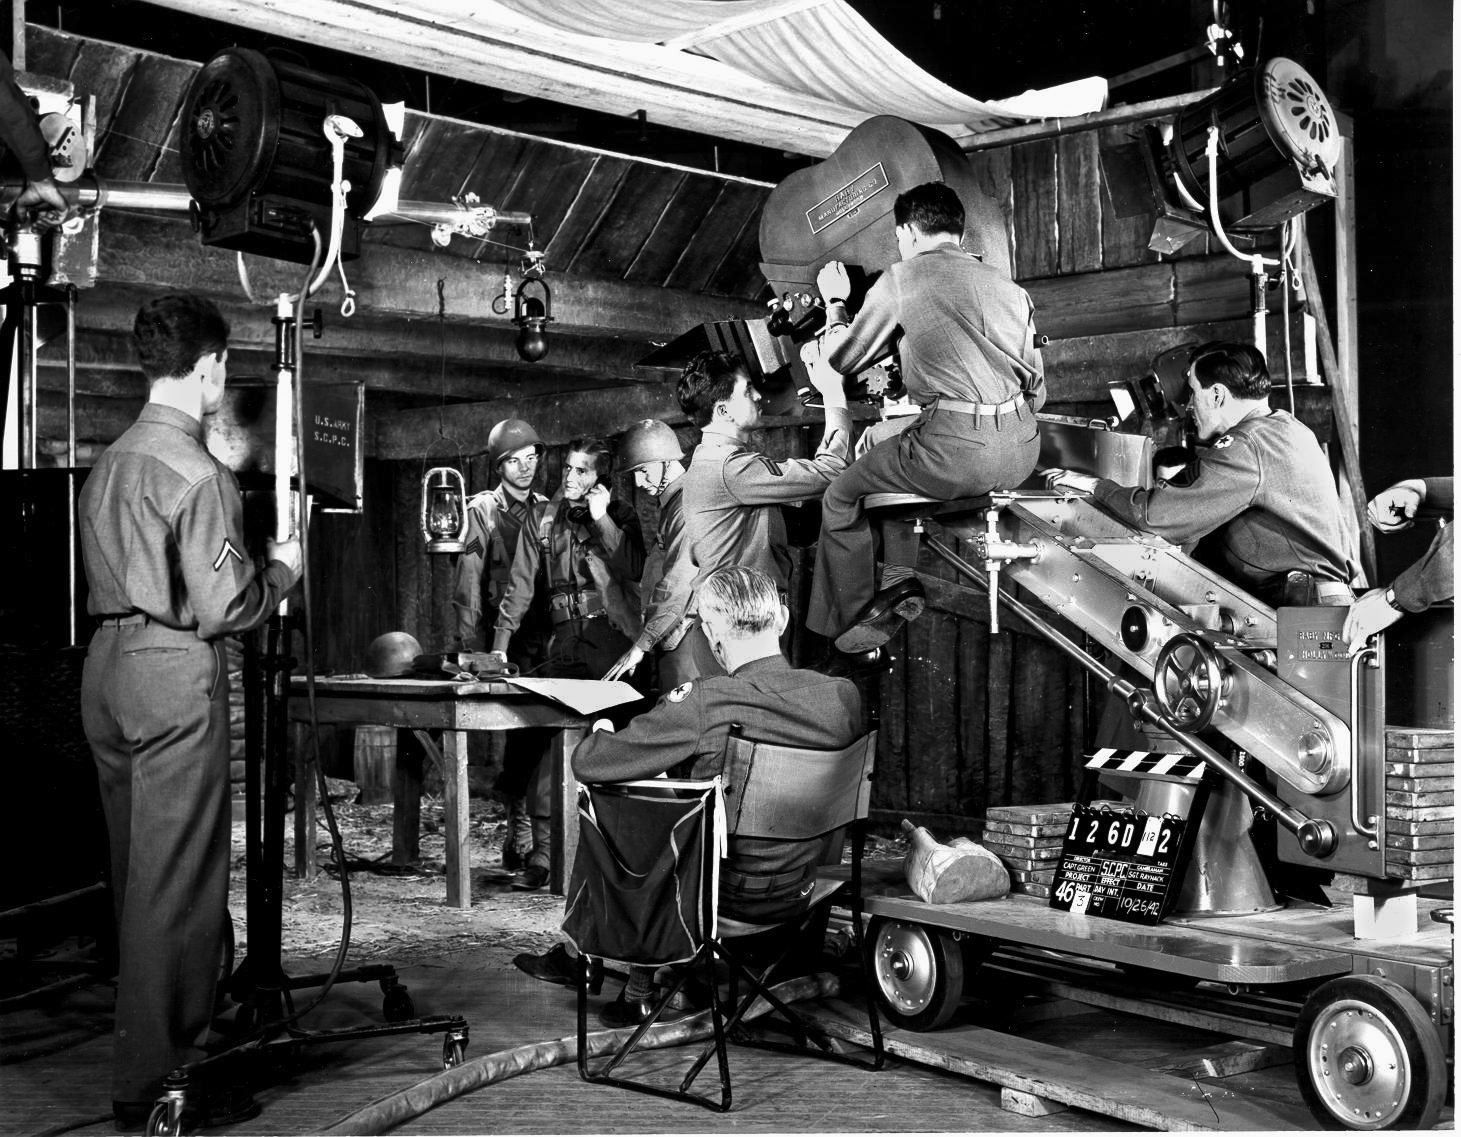 A U.S. Army Signal Corps film crew, including many who had once worked for Hollywood studios as civilians, shoots a scene for a training film. Hollywood fully supported the war effort and worked tirelessly to ensure victory.